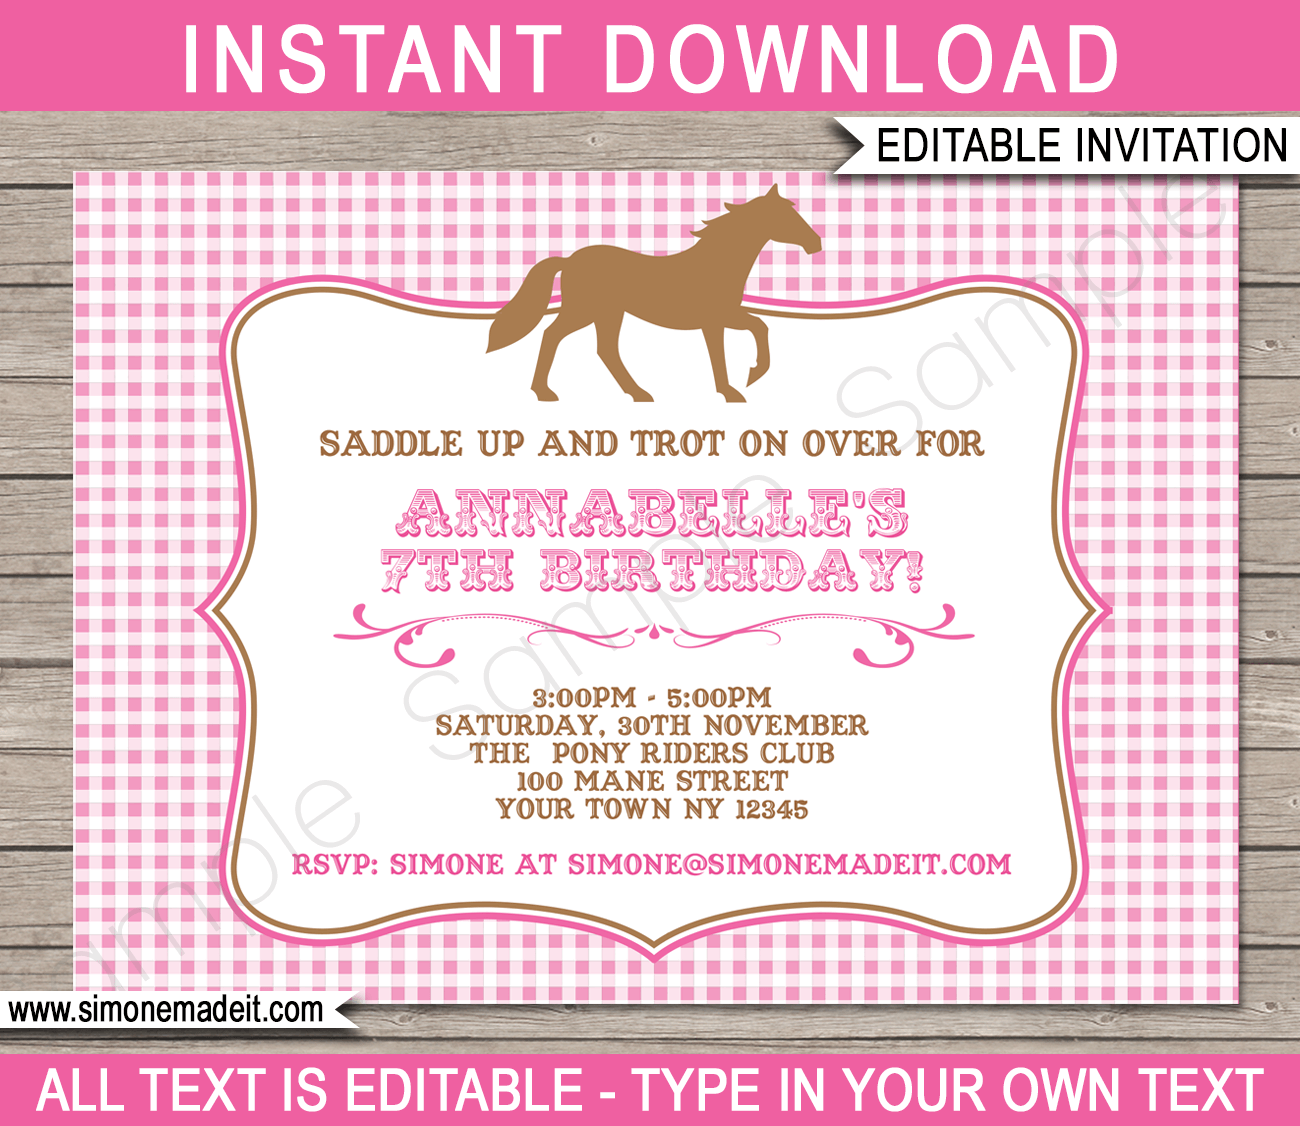 Pony Party Invitations | Horse Party | Birthday Party | Editable DIY Theme Template | INSTANT DOWNLOAD $7.50 via SIMONEmadeit.com